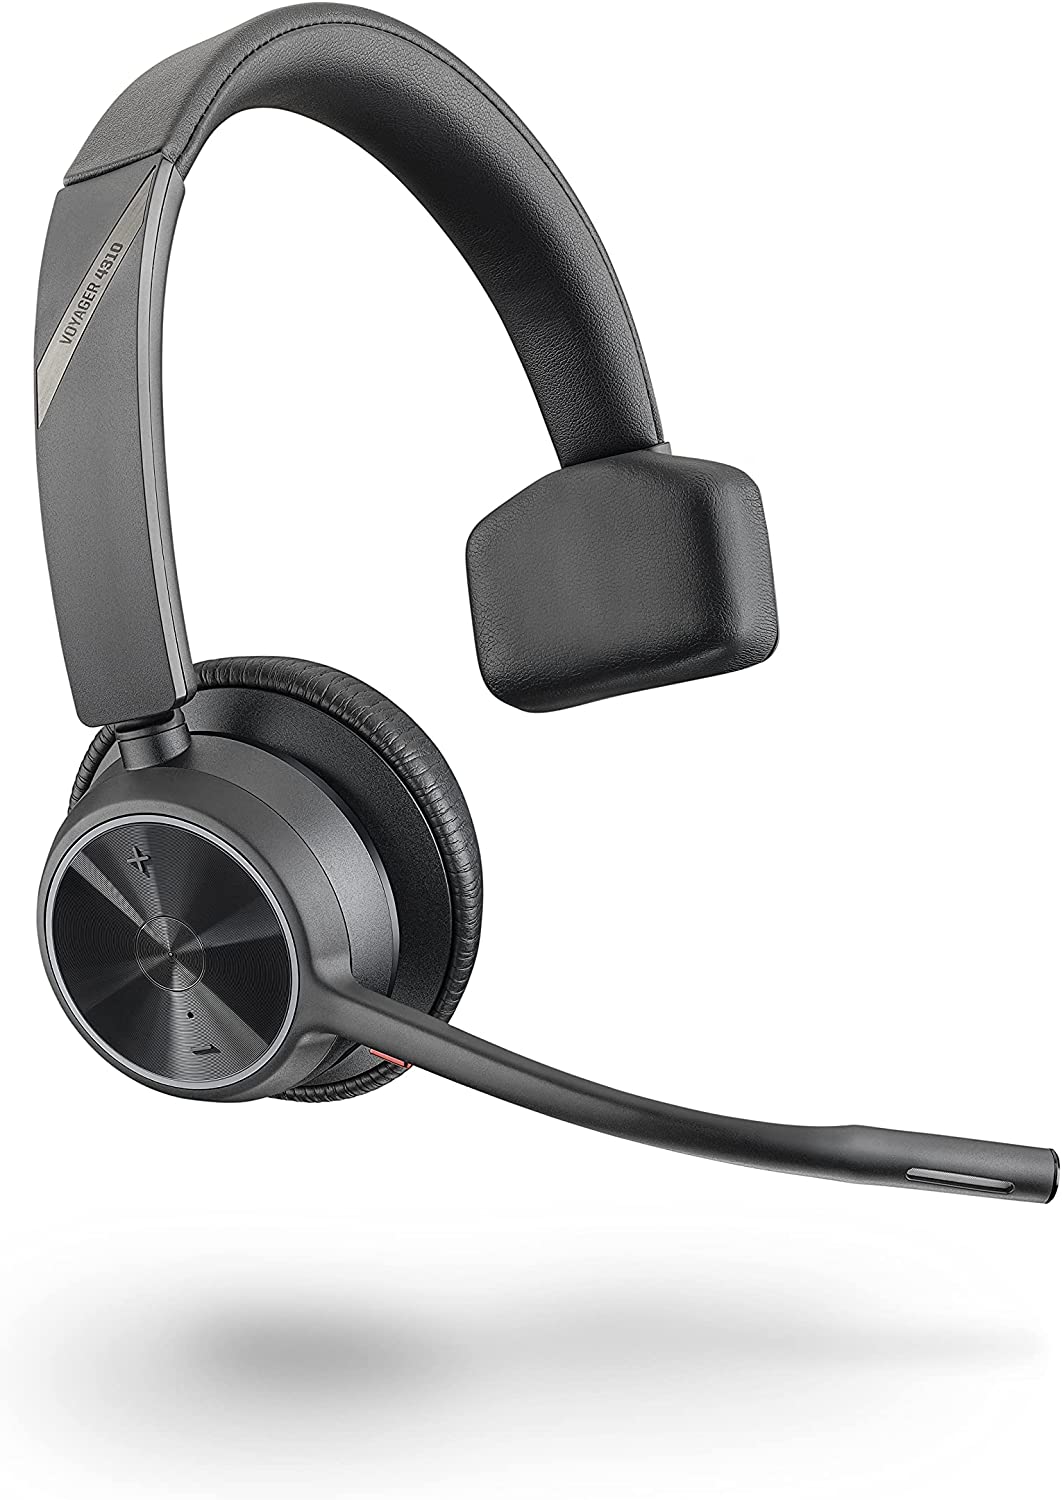 Poly - Voyager 4310 UC Wireless Headset (Plantronics) - Single-Ear Headset with Boom Mic - Connect to PC/Mac via USB-A Bluetooth Adapter, Cell Phone via Bluetooth - Works with Teams, Zoom &amp; More USB-A Headset